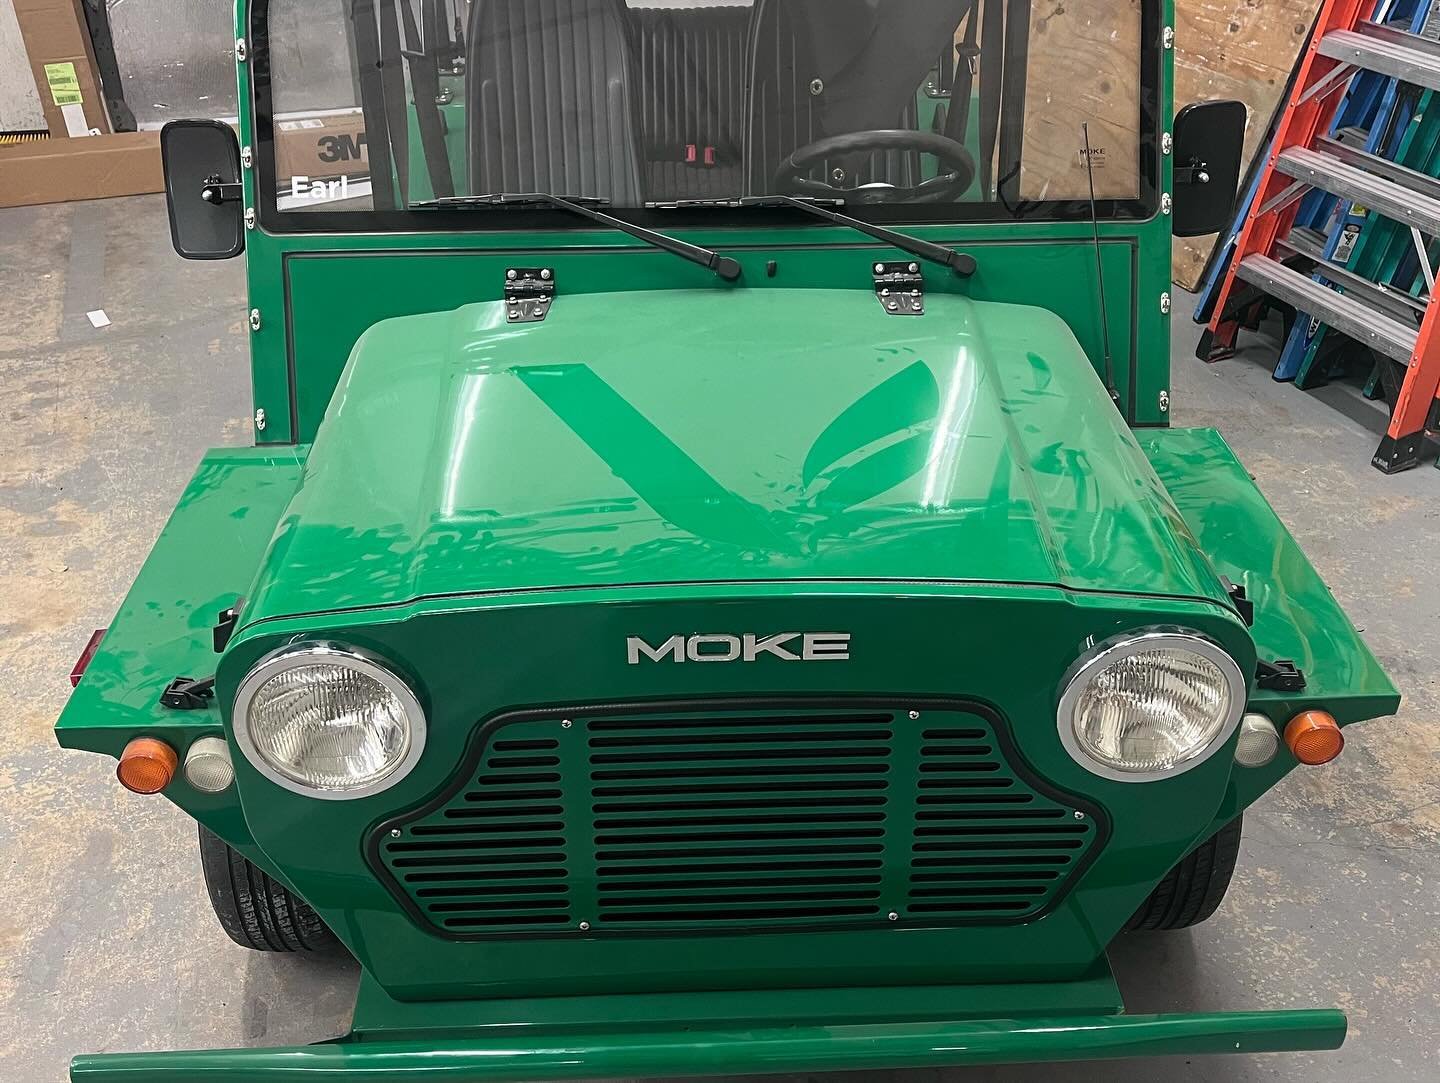 Check out this color change on a golf cart. The original color was green and changed to blue. Incredible detail from our install team. Great job guys.